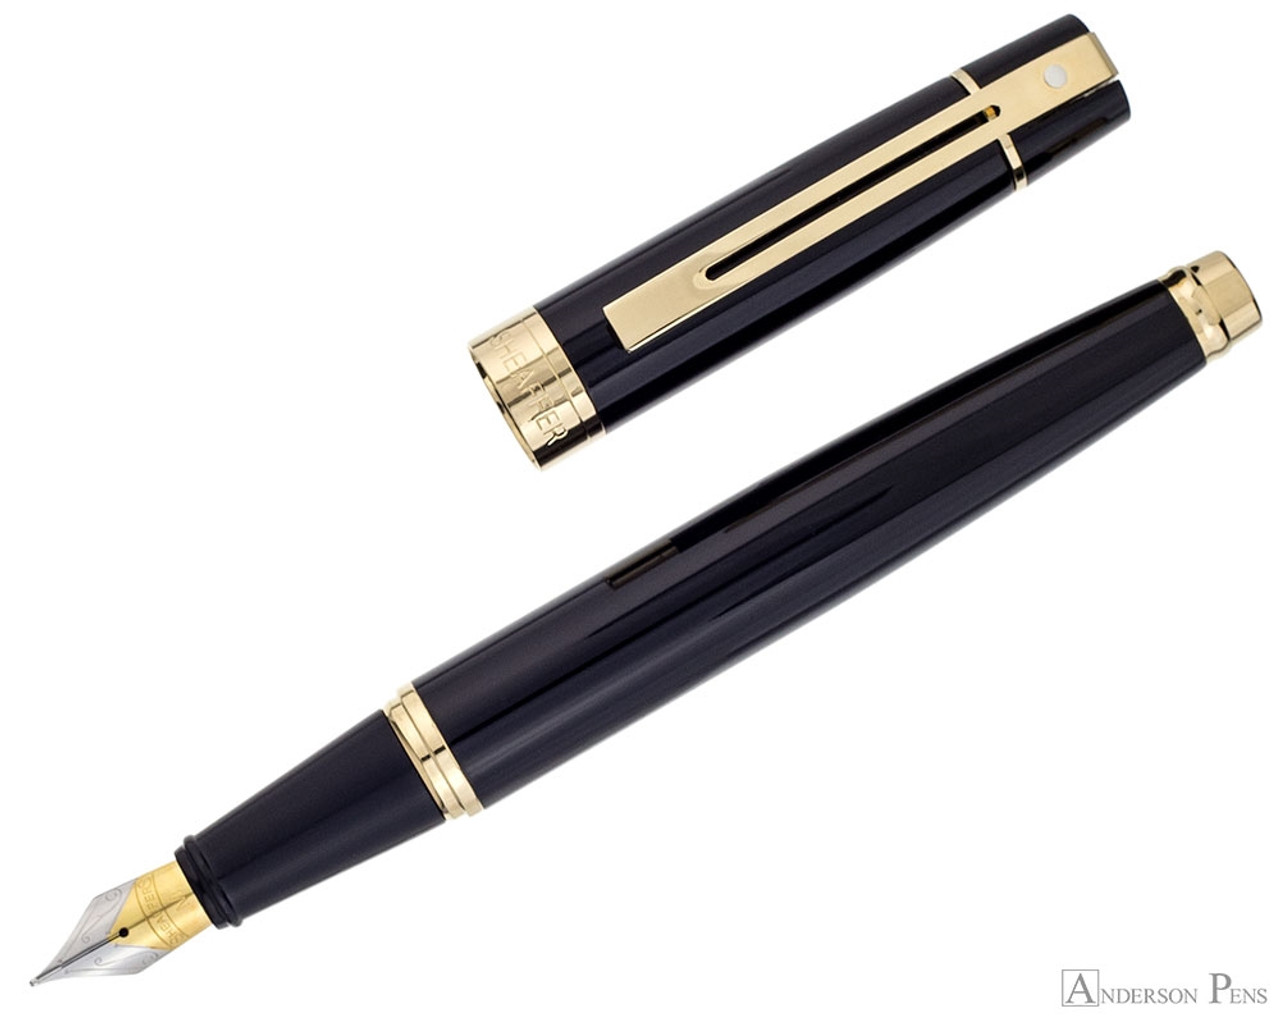 Sheaffer 300 Fountain Pen - Black with Gold Trim - Anderson Pens, Inc.